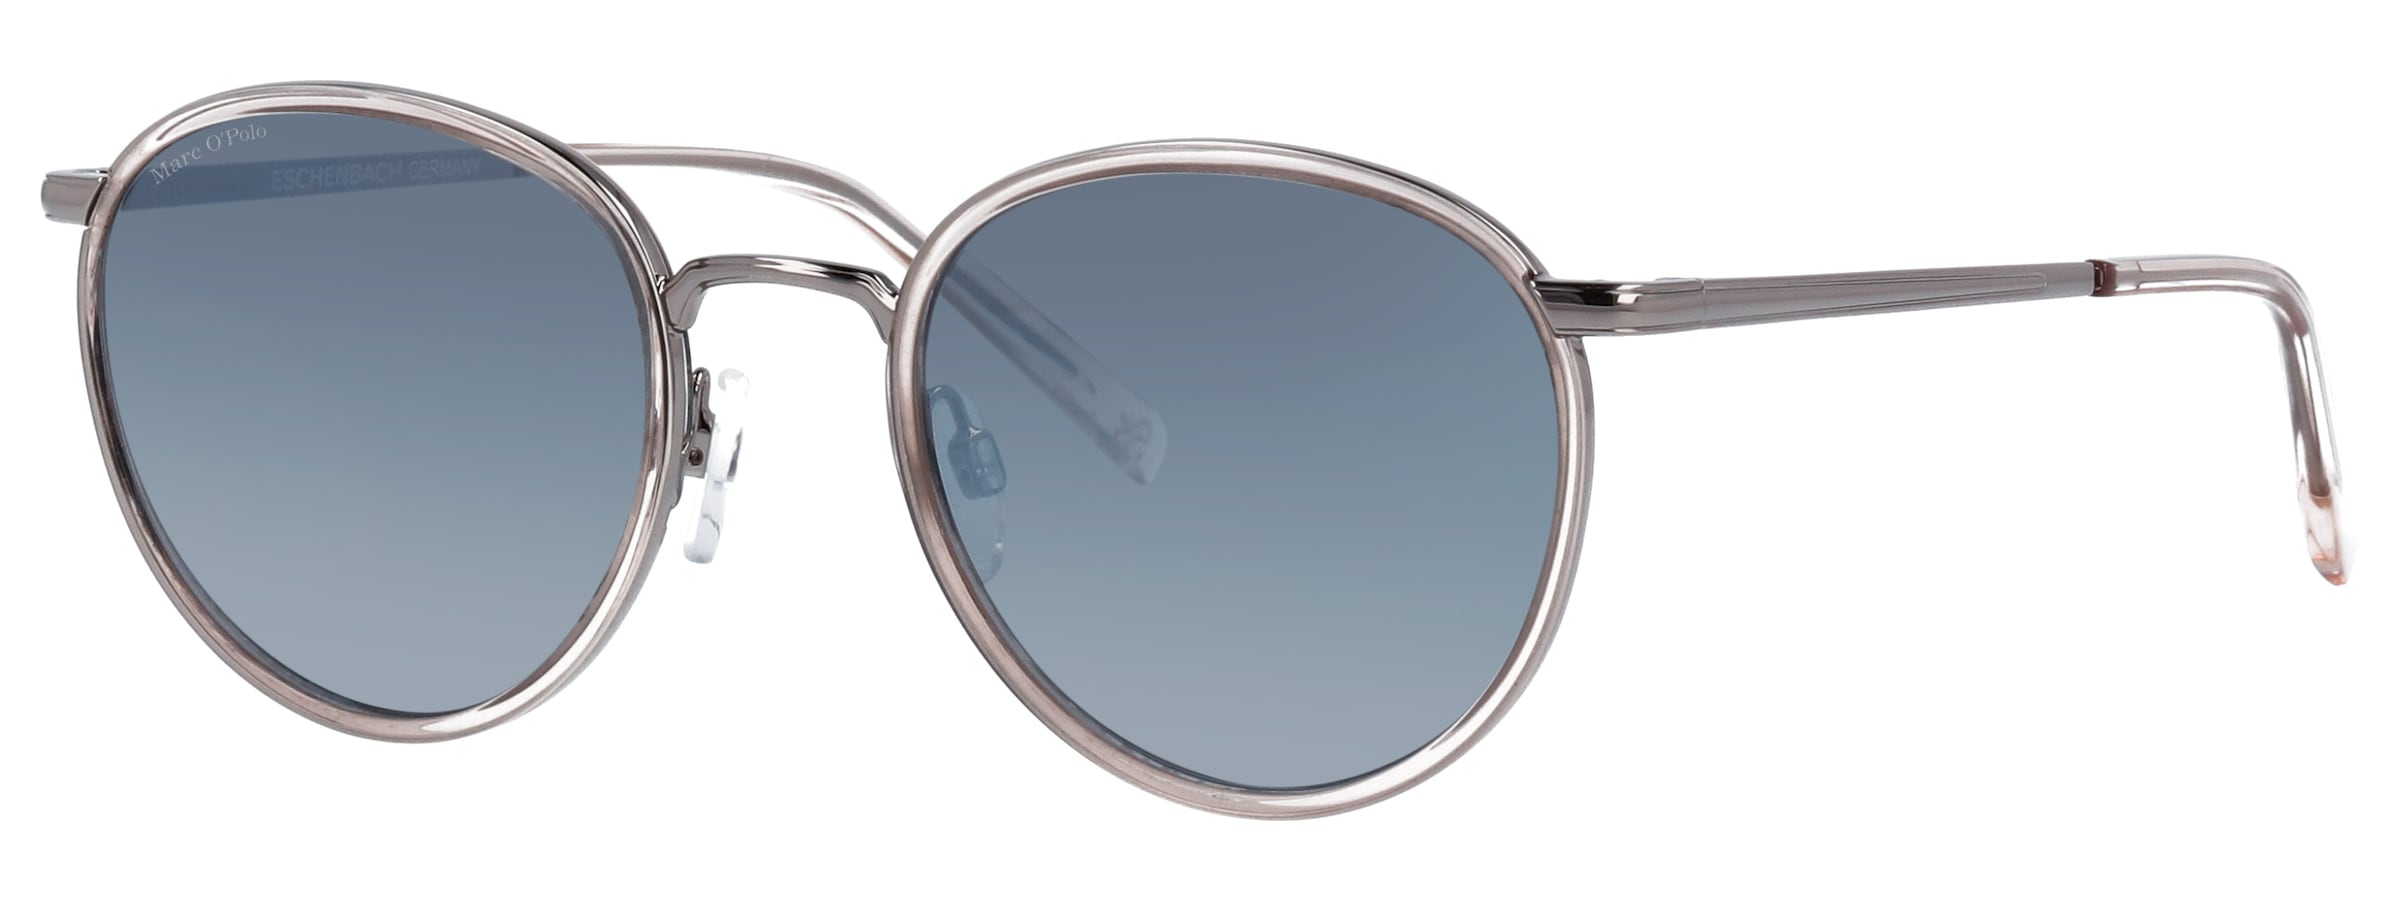 Marc OPolo Sonnenbrille "Modell 505105", Panto-Form